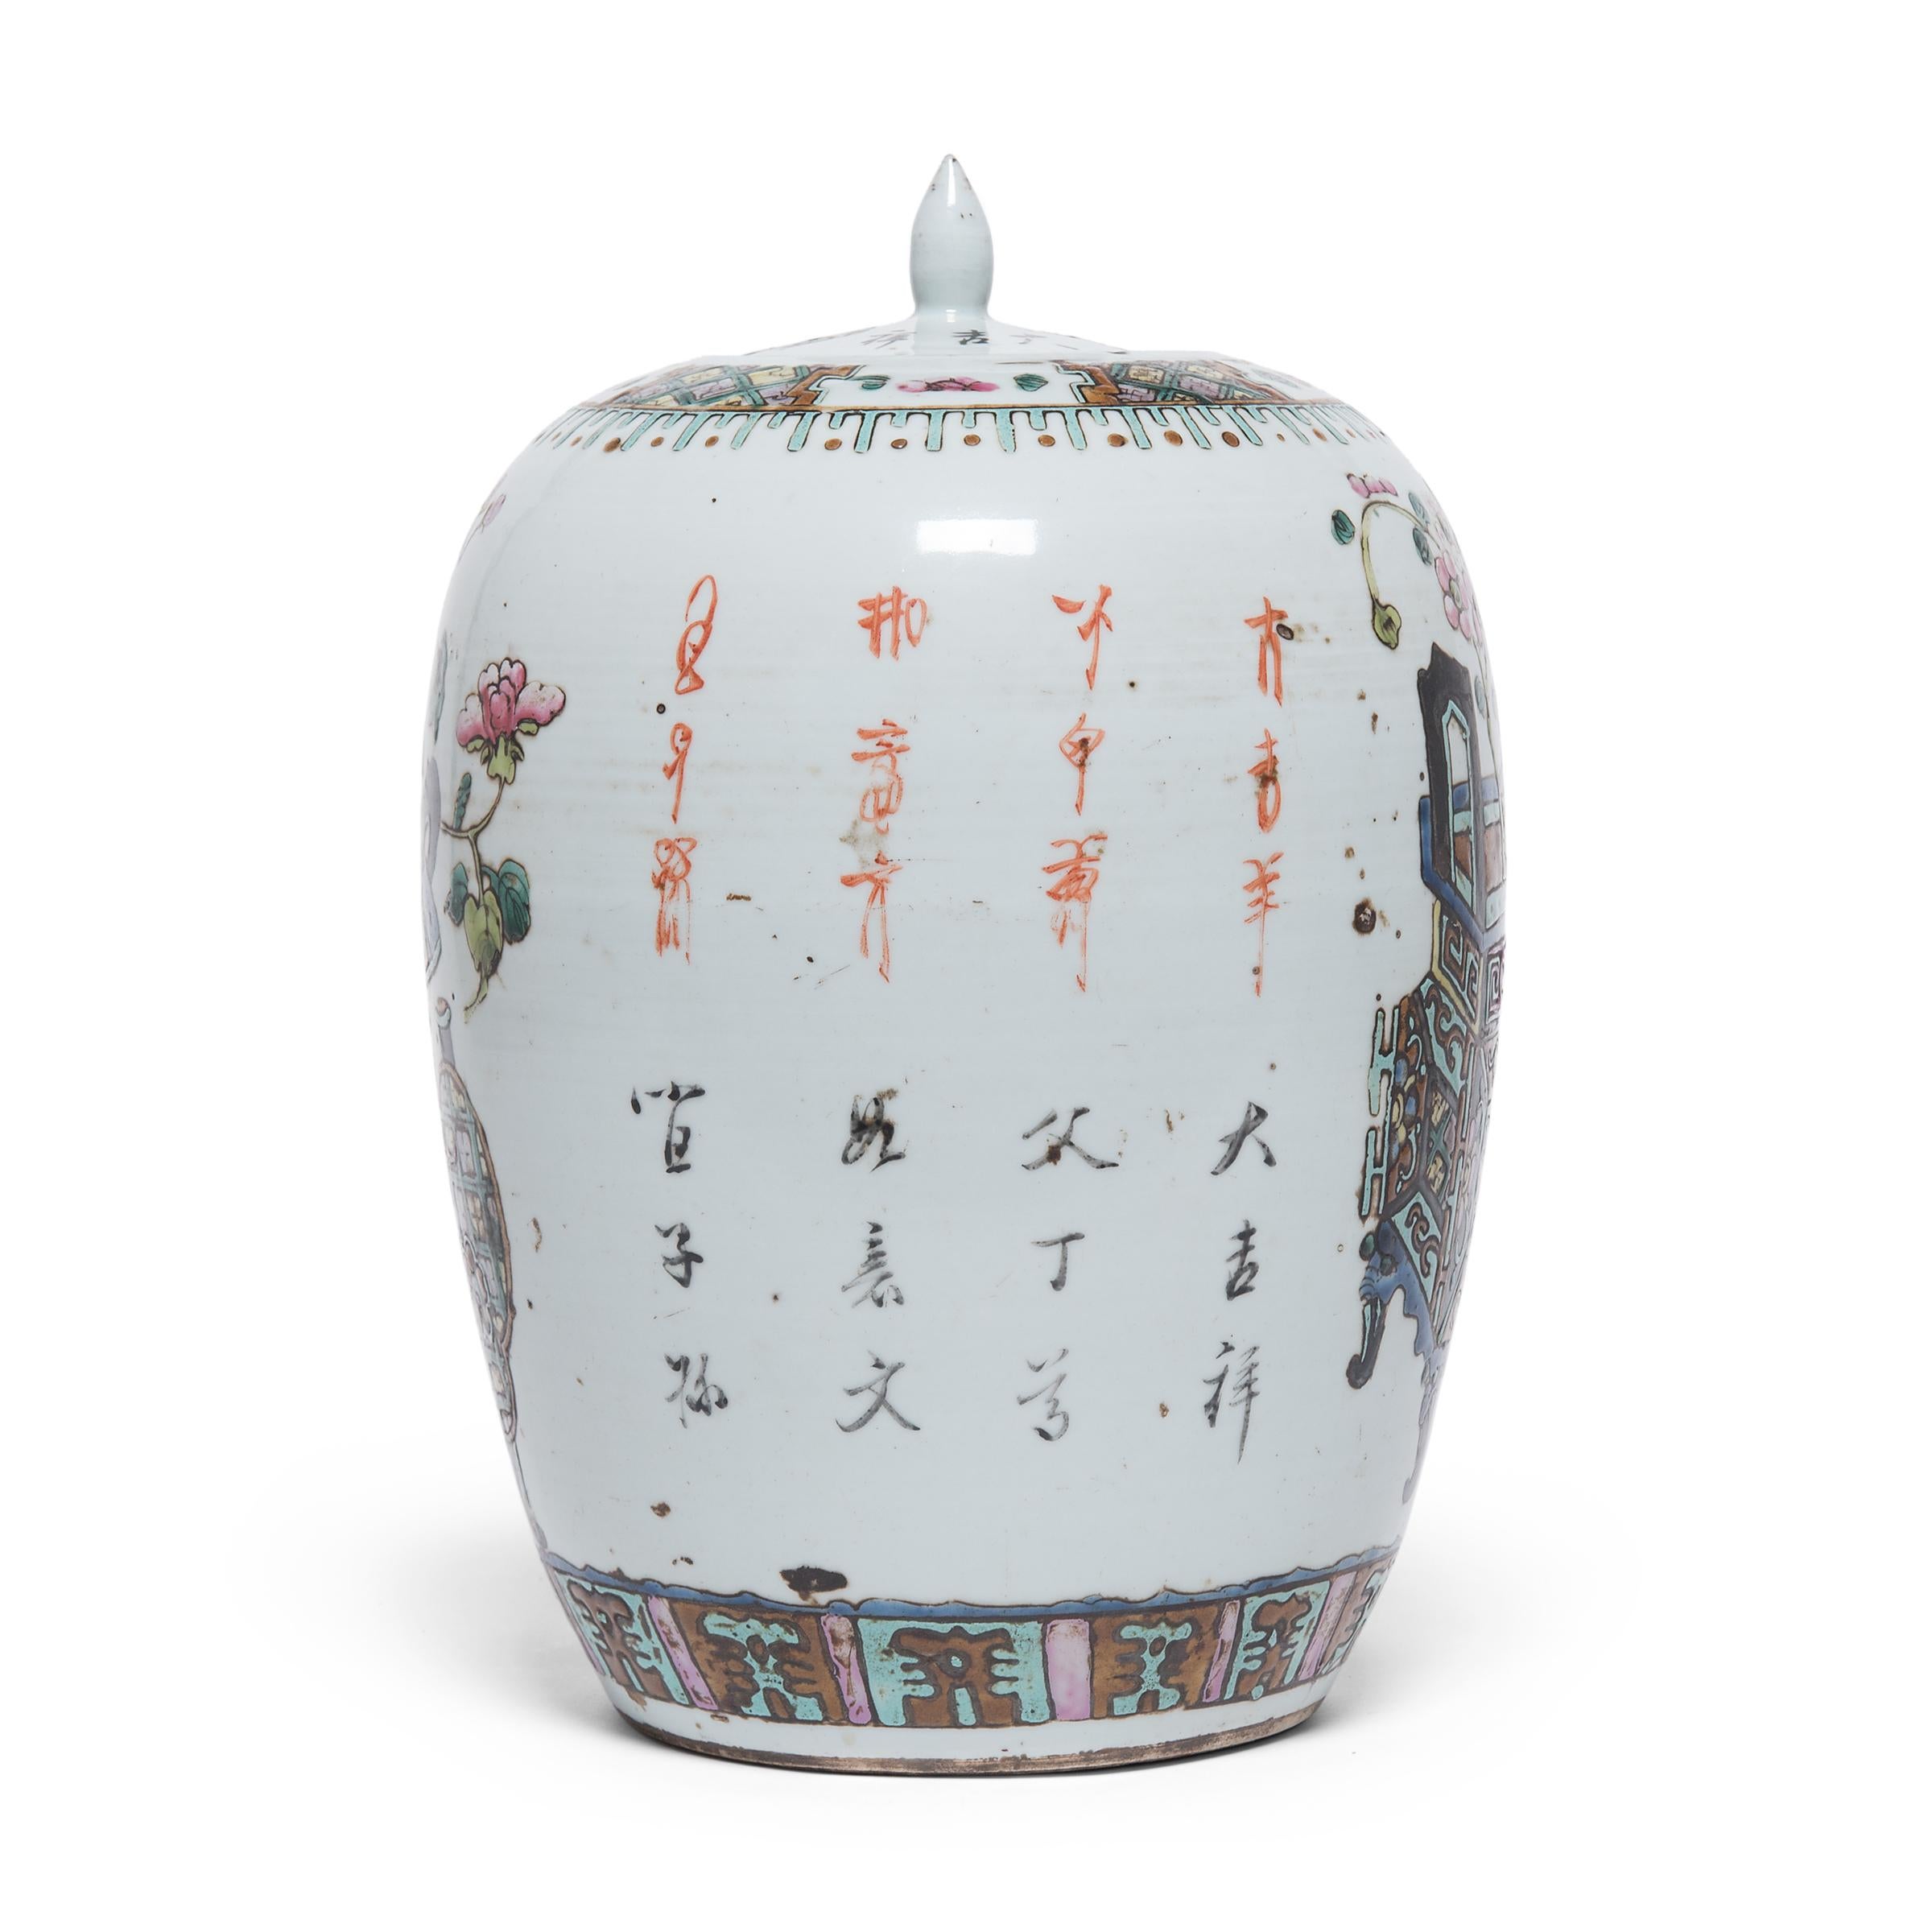 Beautifully commemorated on this oval ginger jar, censers have been used for thousands of years in Chinese culture as a part of funeral rites or prayer offerings. Filled with dried aromatic plants and essential oils, the censer issued fragrant smoke